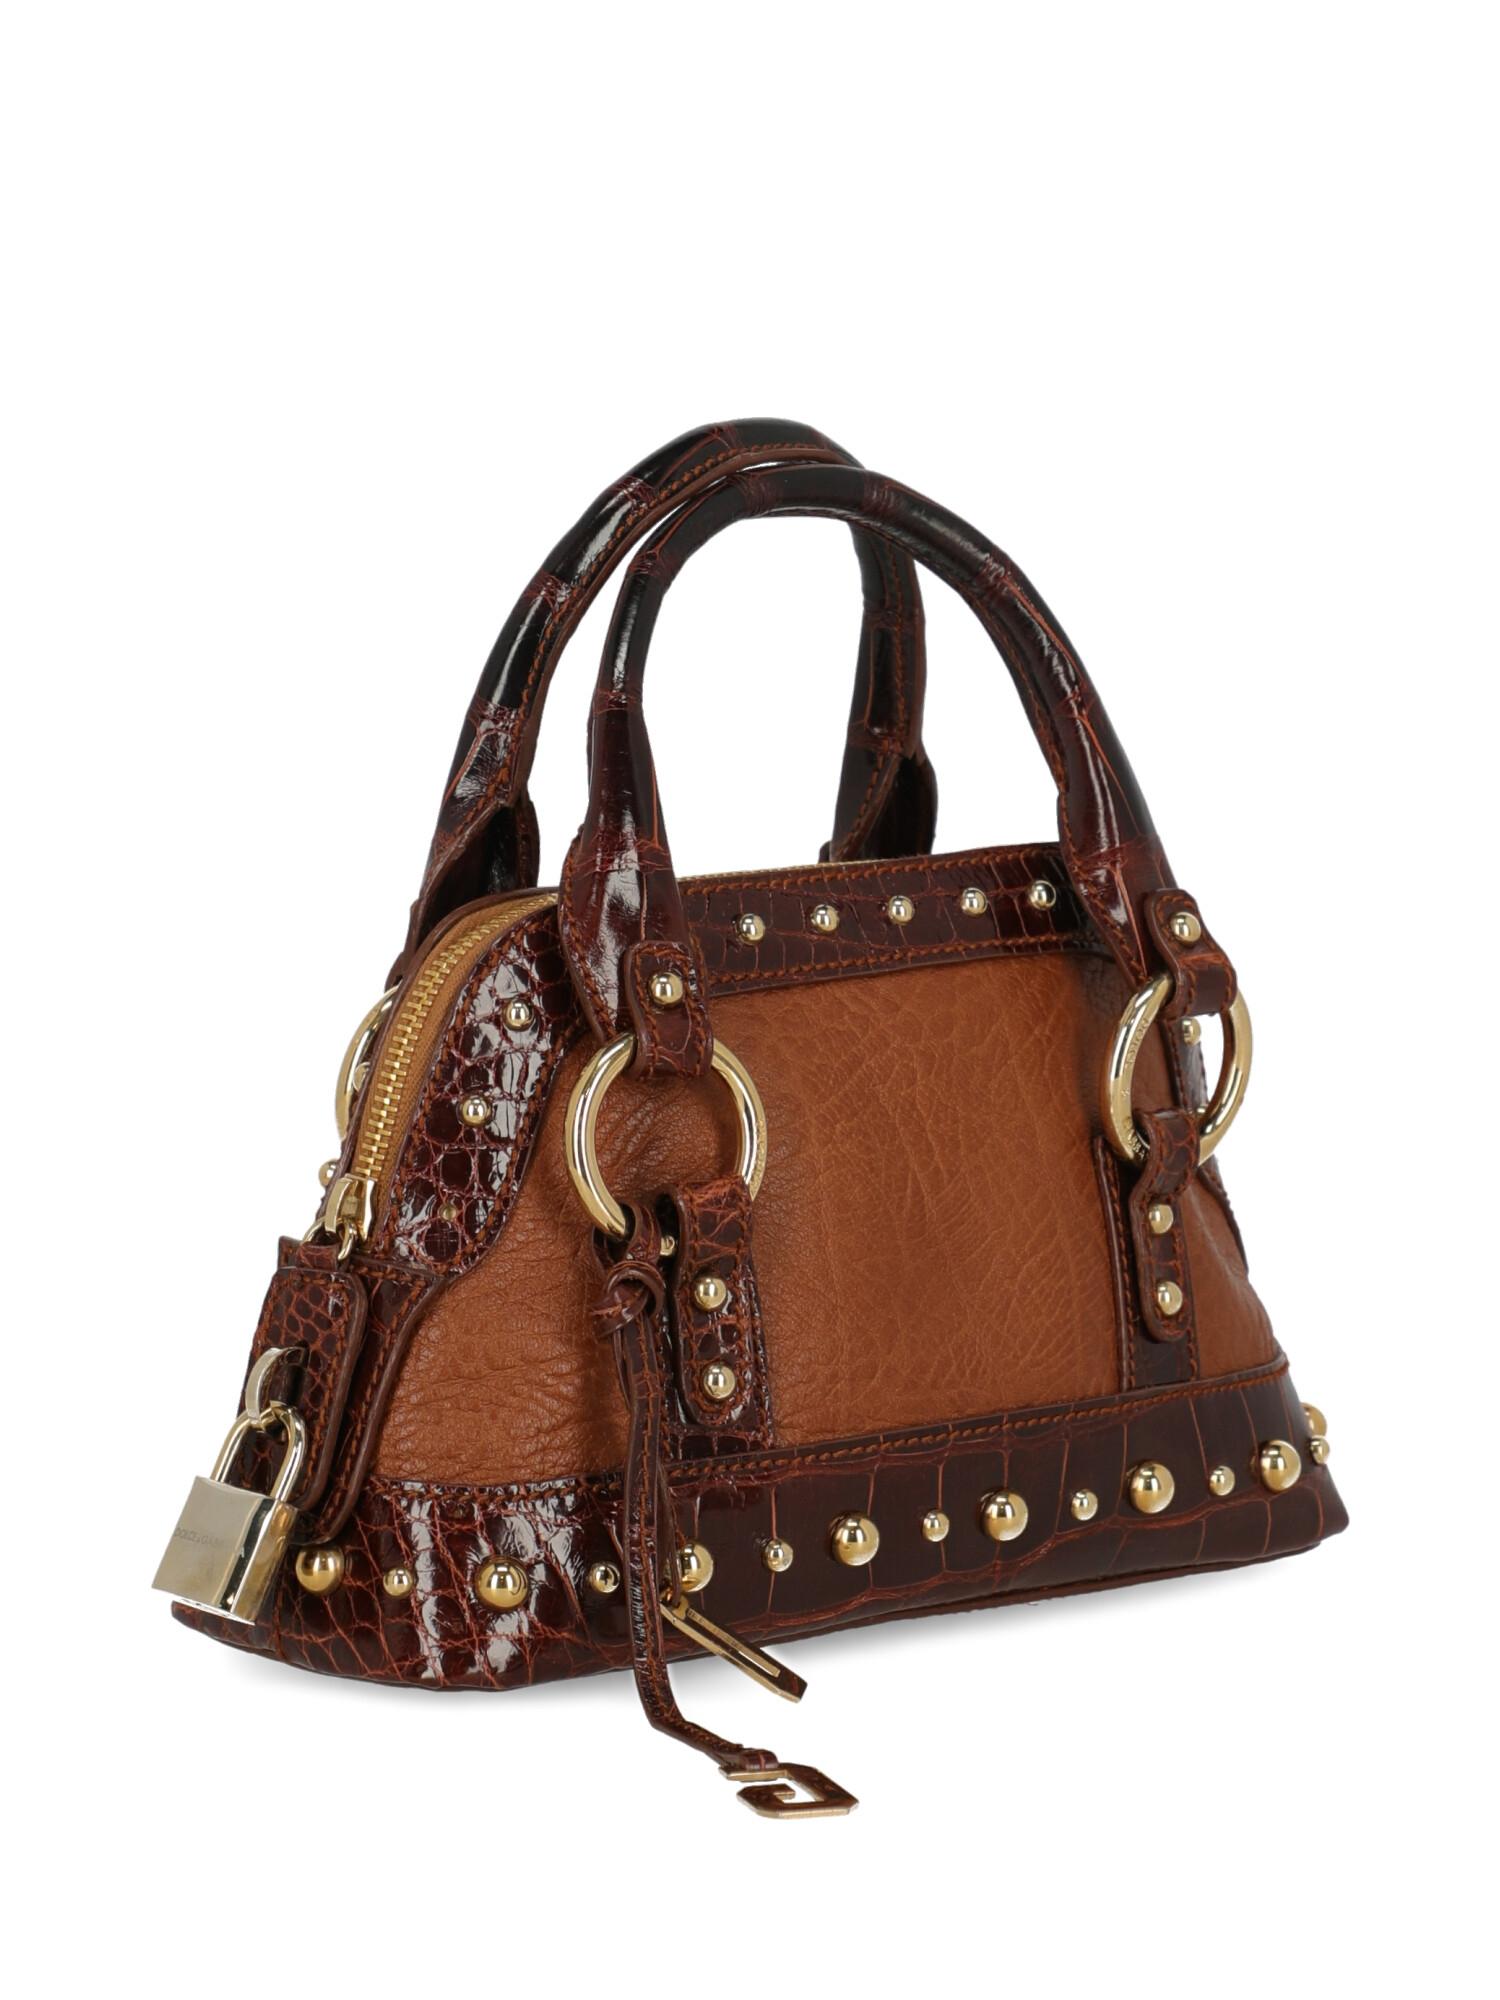 Dolce & Gabbana Woman Handbag Brown Leather In Good Condition For Sale In Milan, IT